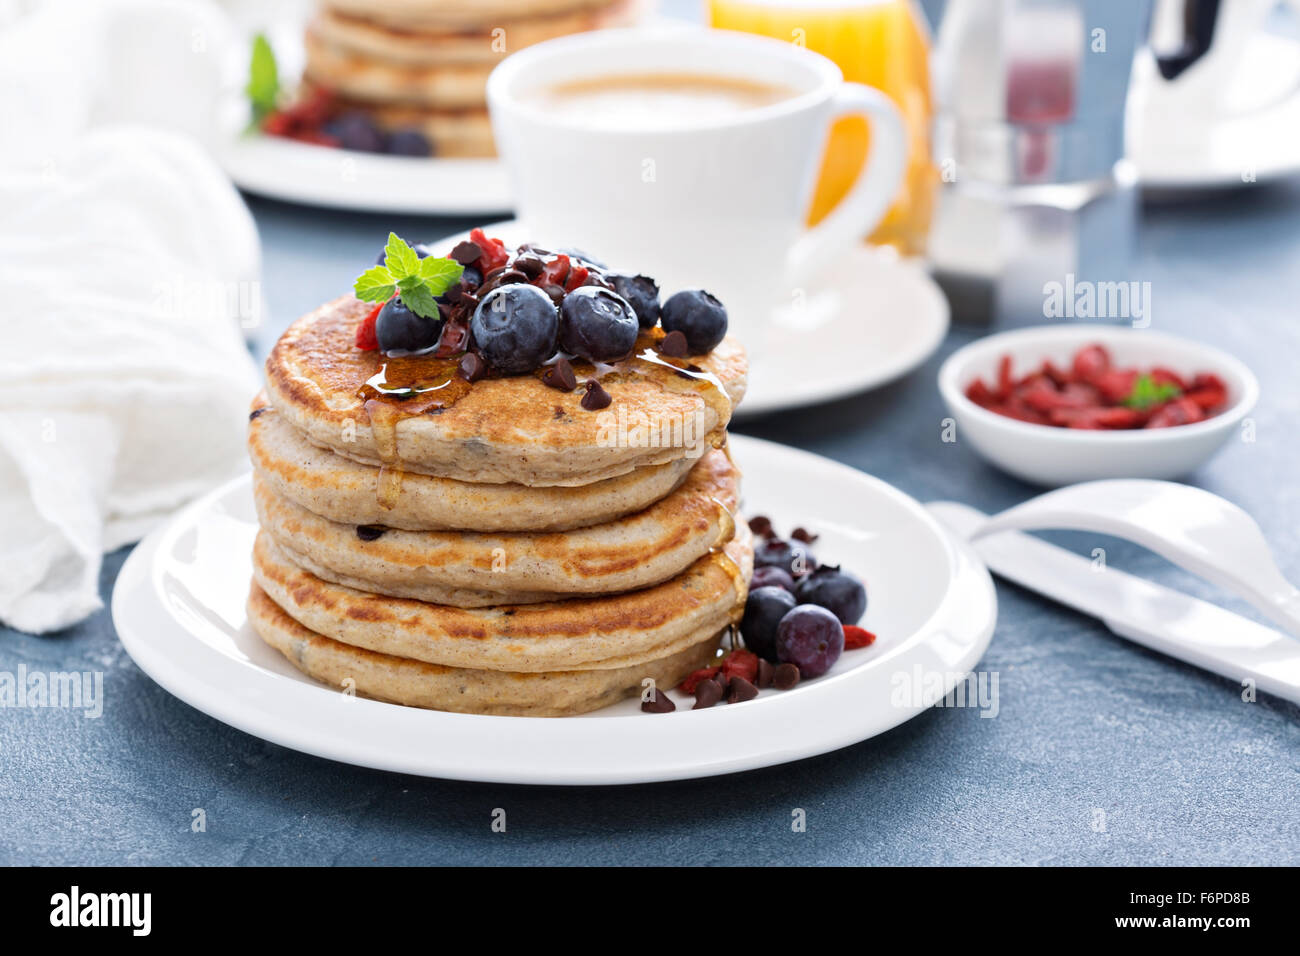 Fluffy chocolate chip pancakes on breakfast table Stock Photo